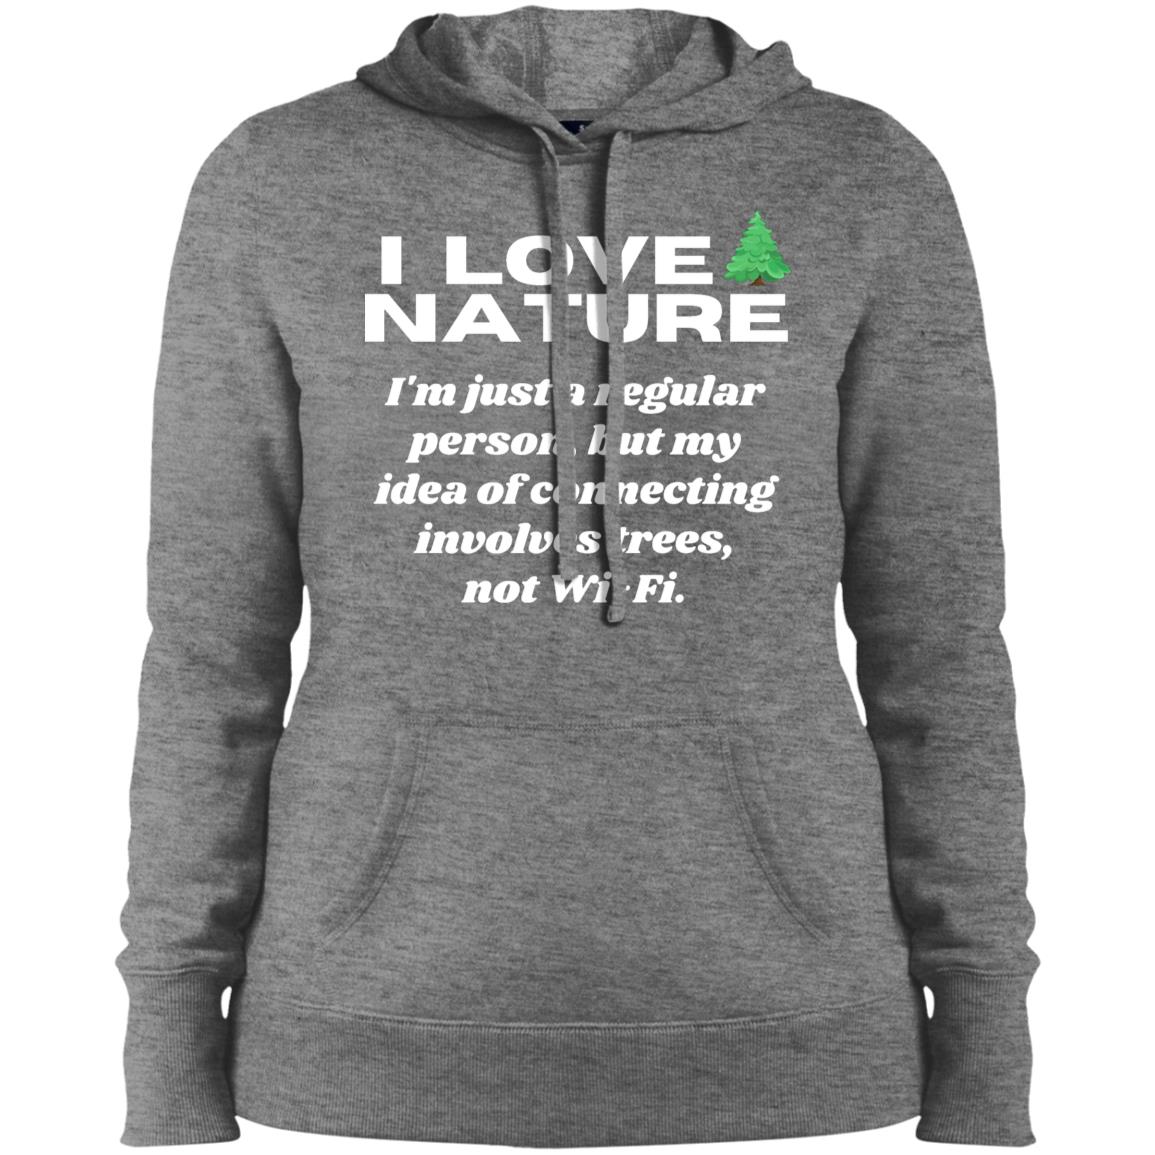 NATURE CONNECTION VIBES Ladies' Pullover Hooded Sweatshirt